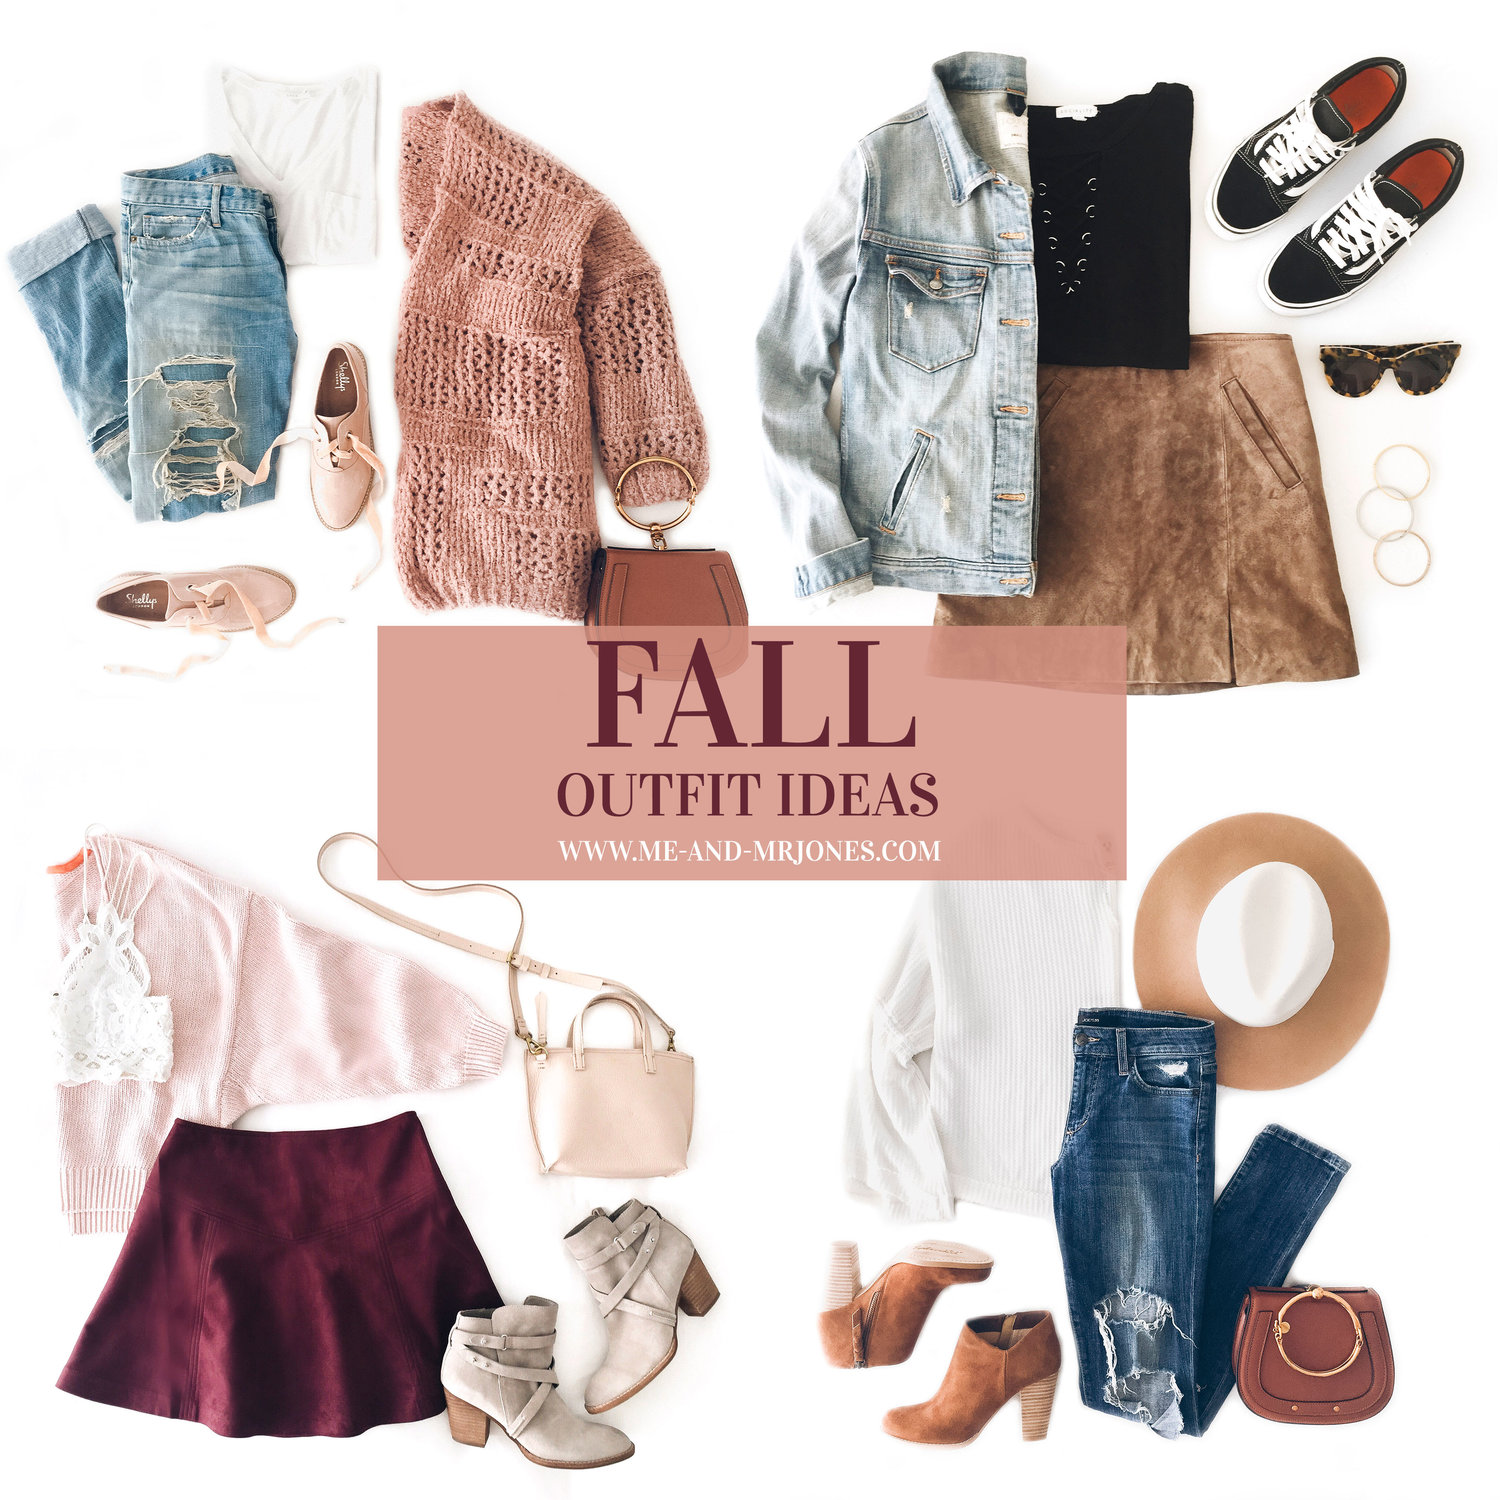 4 CASUAL FALL OUTFIT IDEAS — Me and Mr. Jones